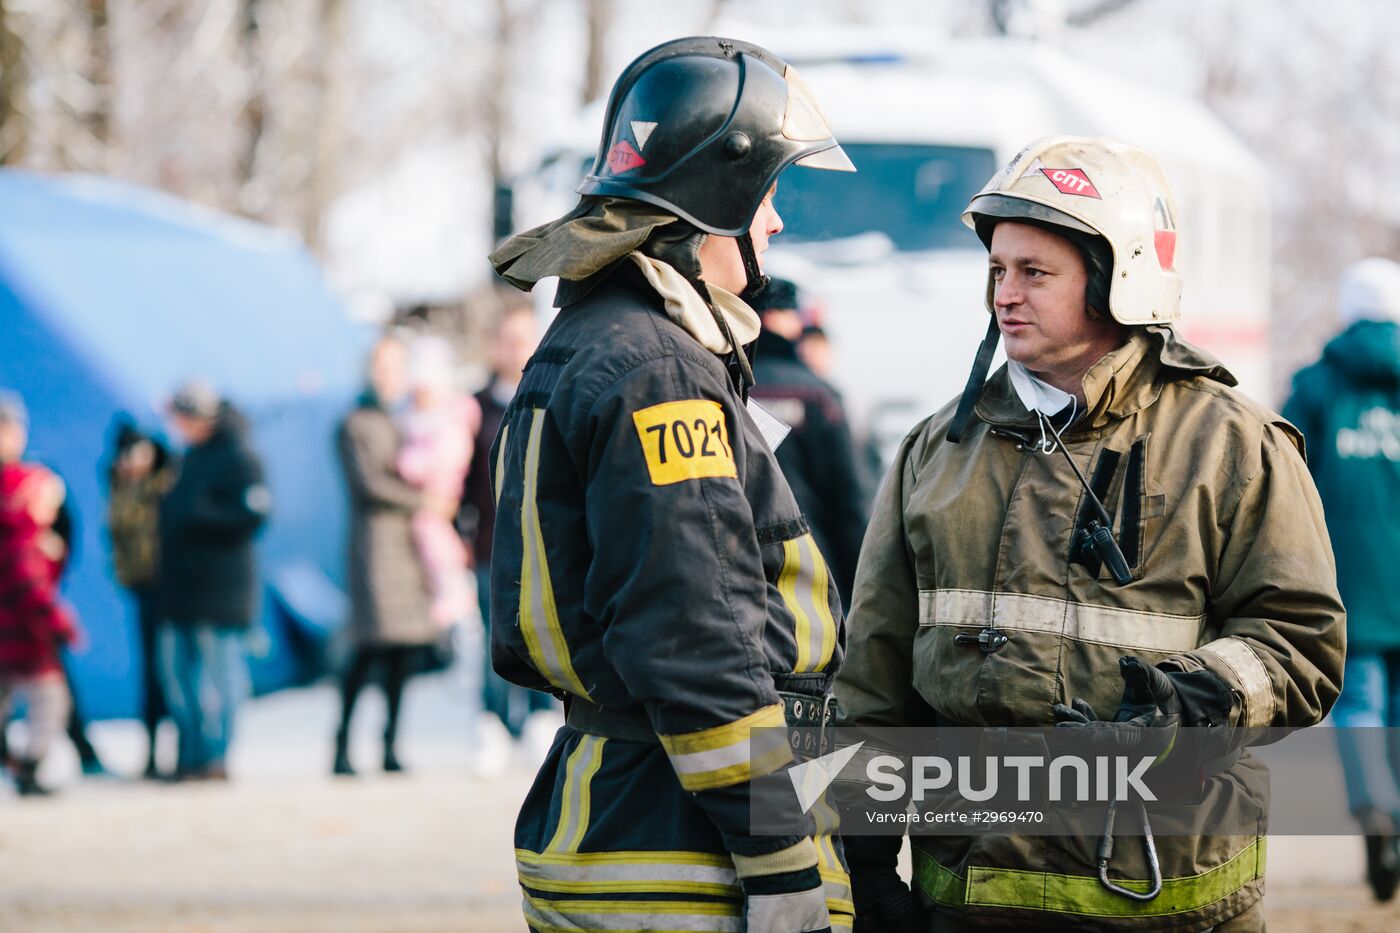 Consequences of gas explosion in residential house in Ivanovo